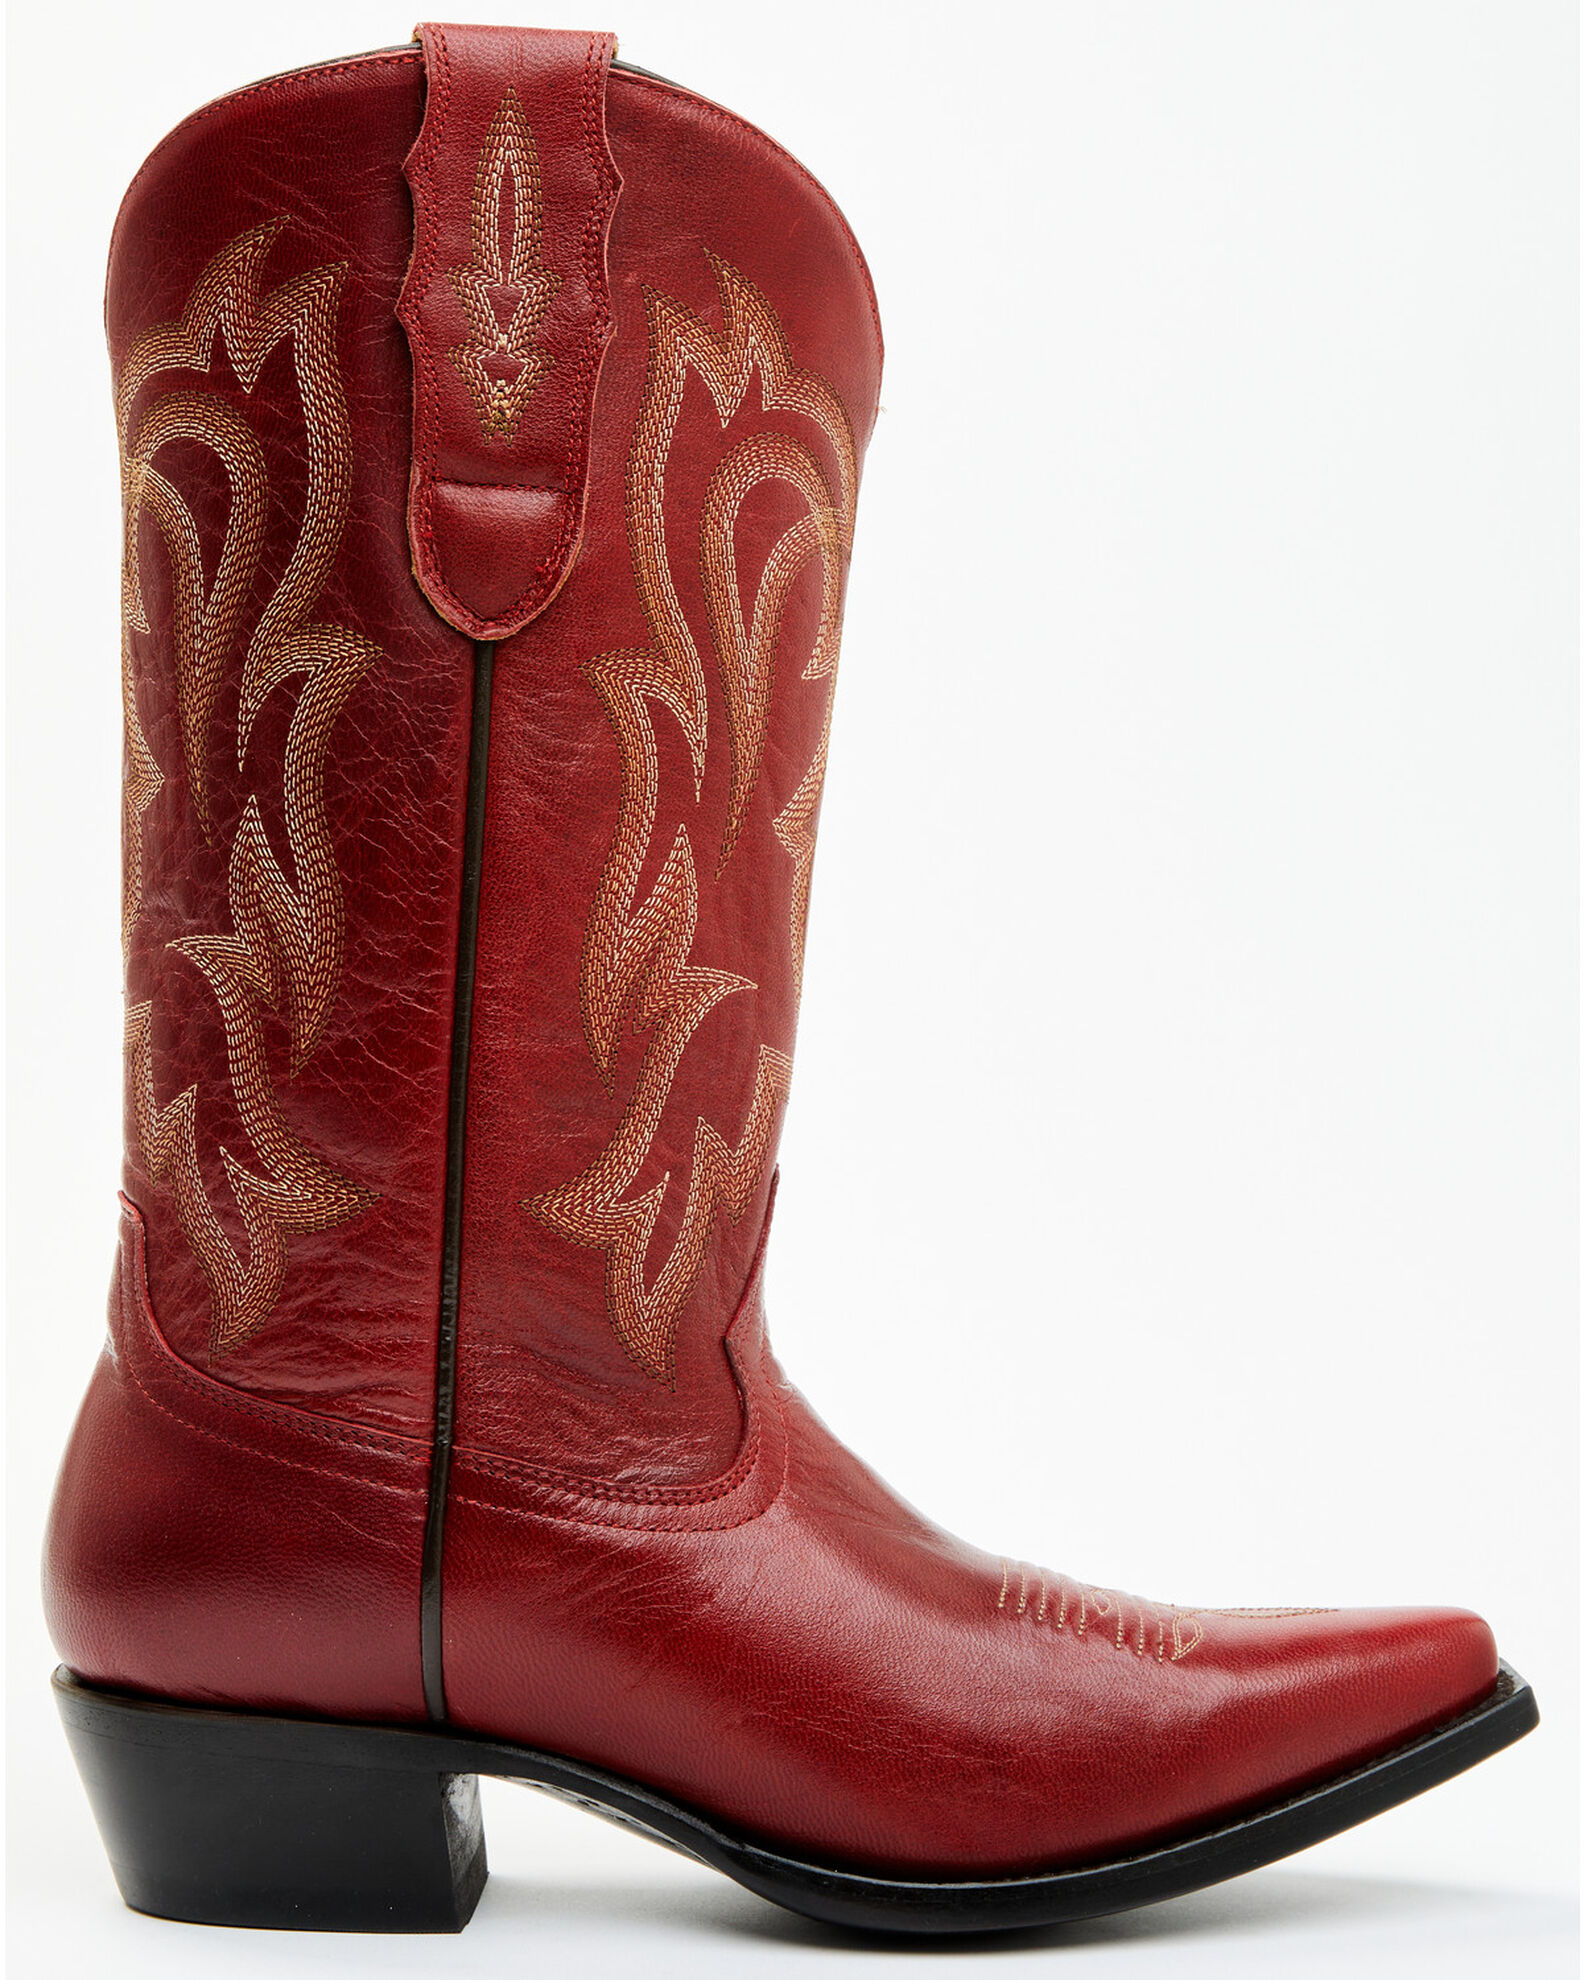 Product Name: Shyanne Women's Lucille Western Boots - Snip Toe